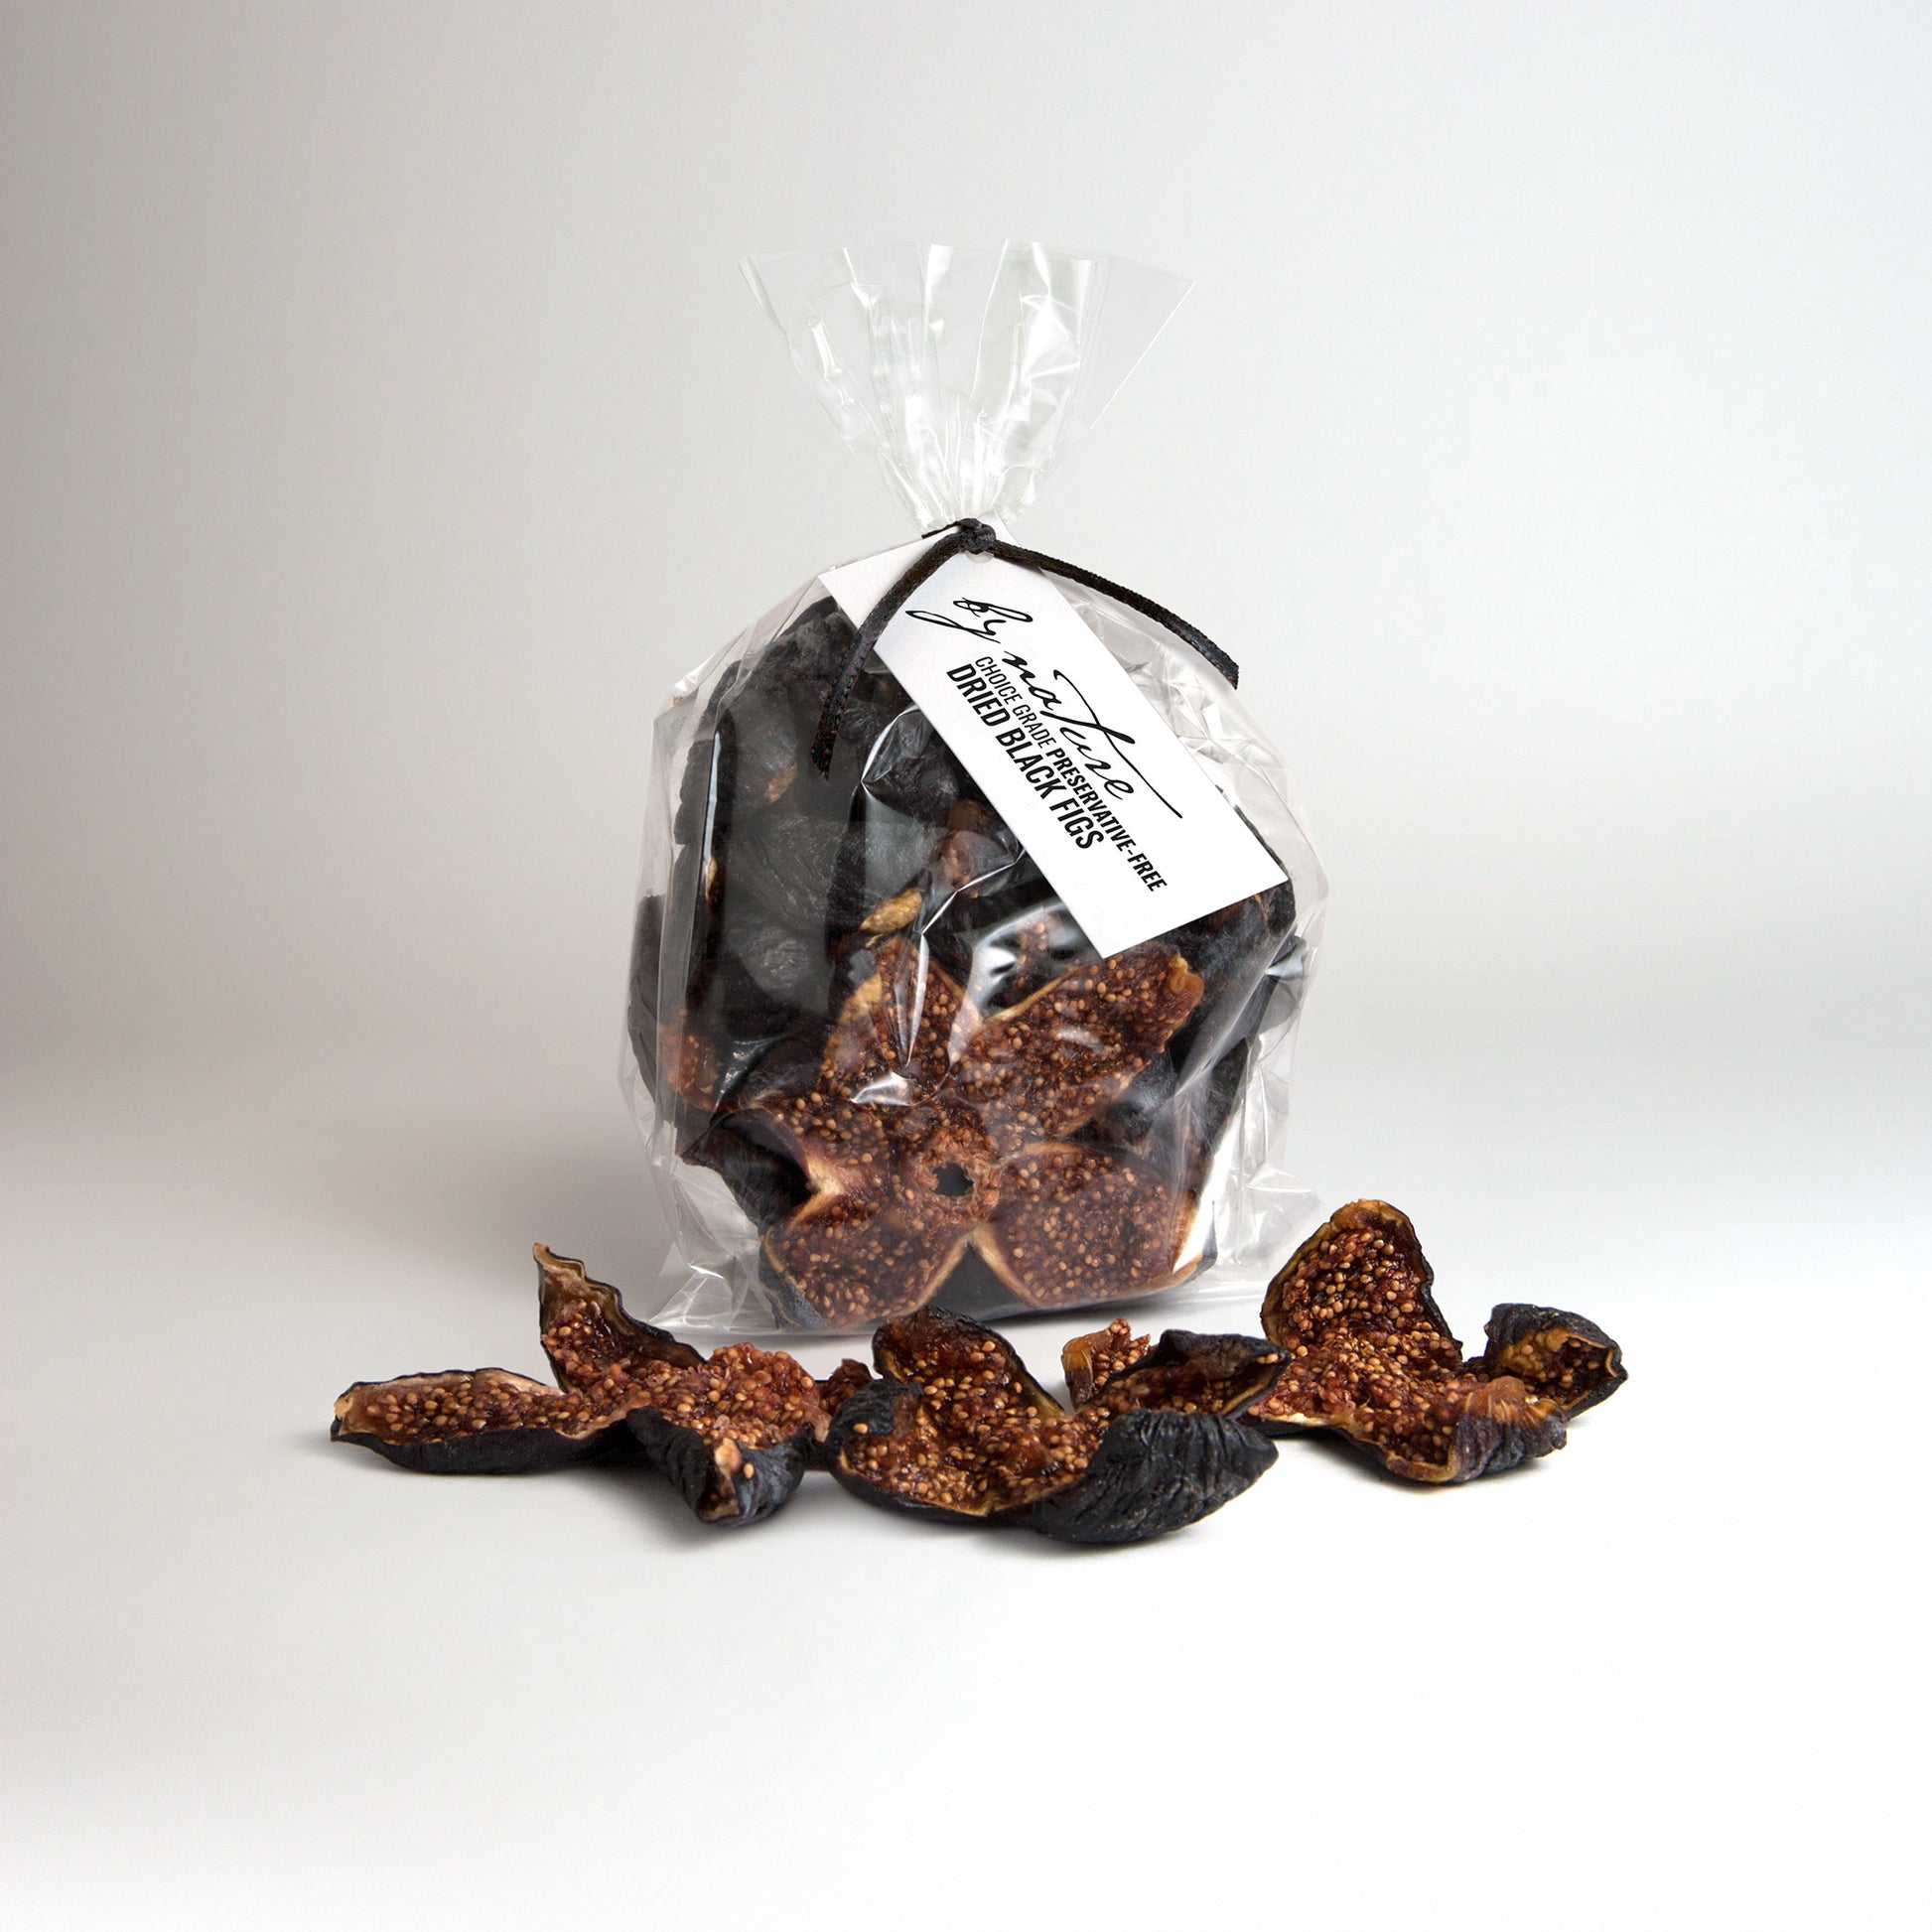 BY NATURE Dried Black Figs with skin, 150g - preservative-free.